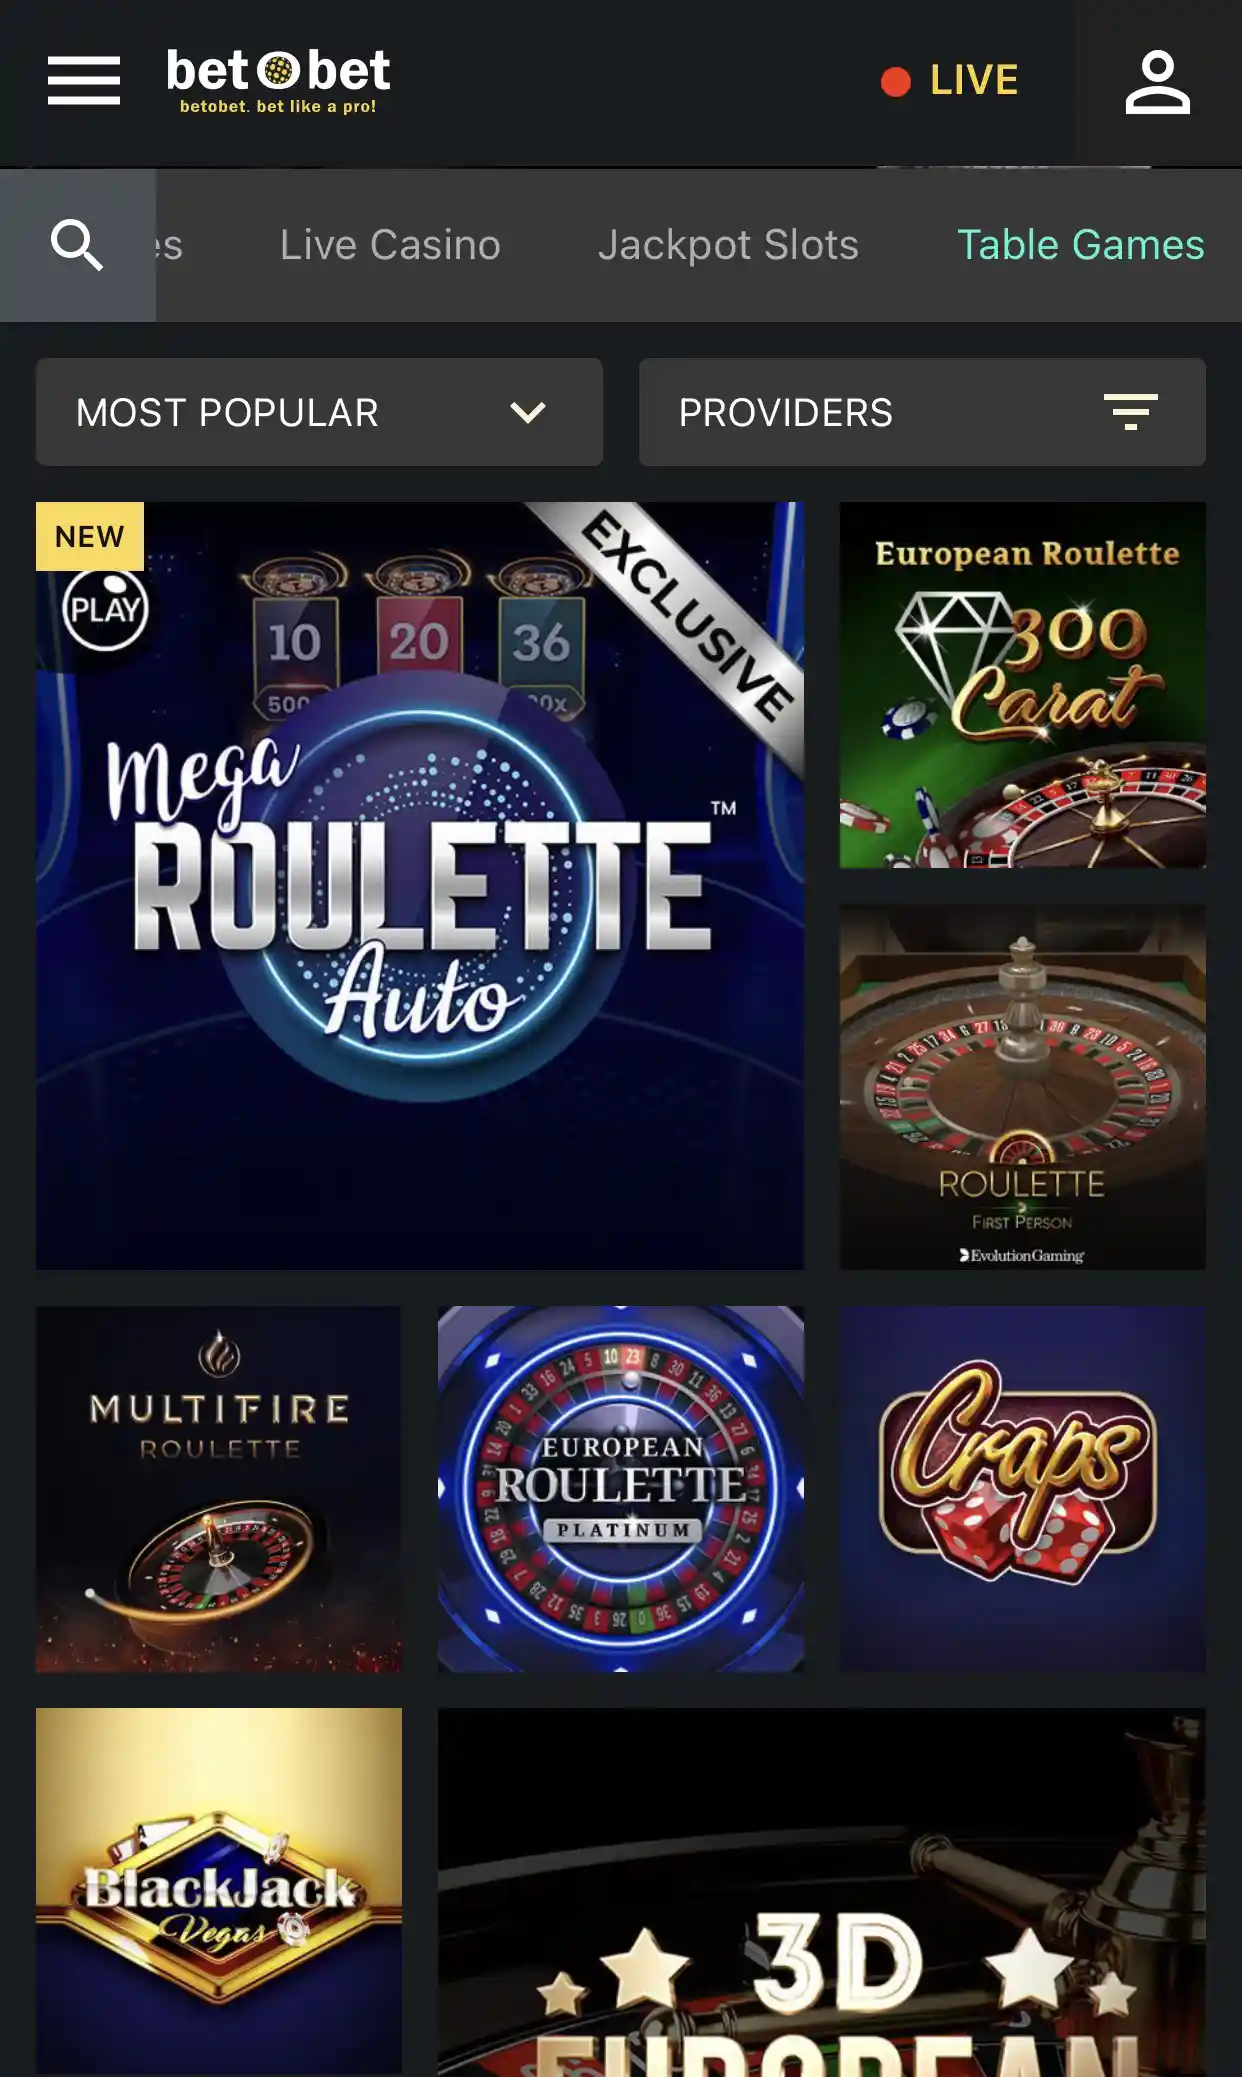 Table games and roulette at Betobet Casino with big wins.